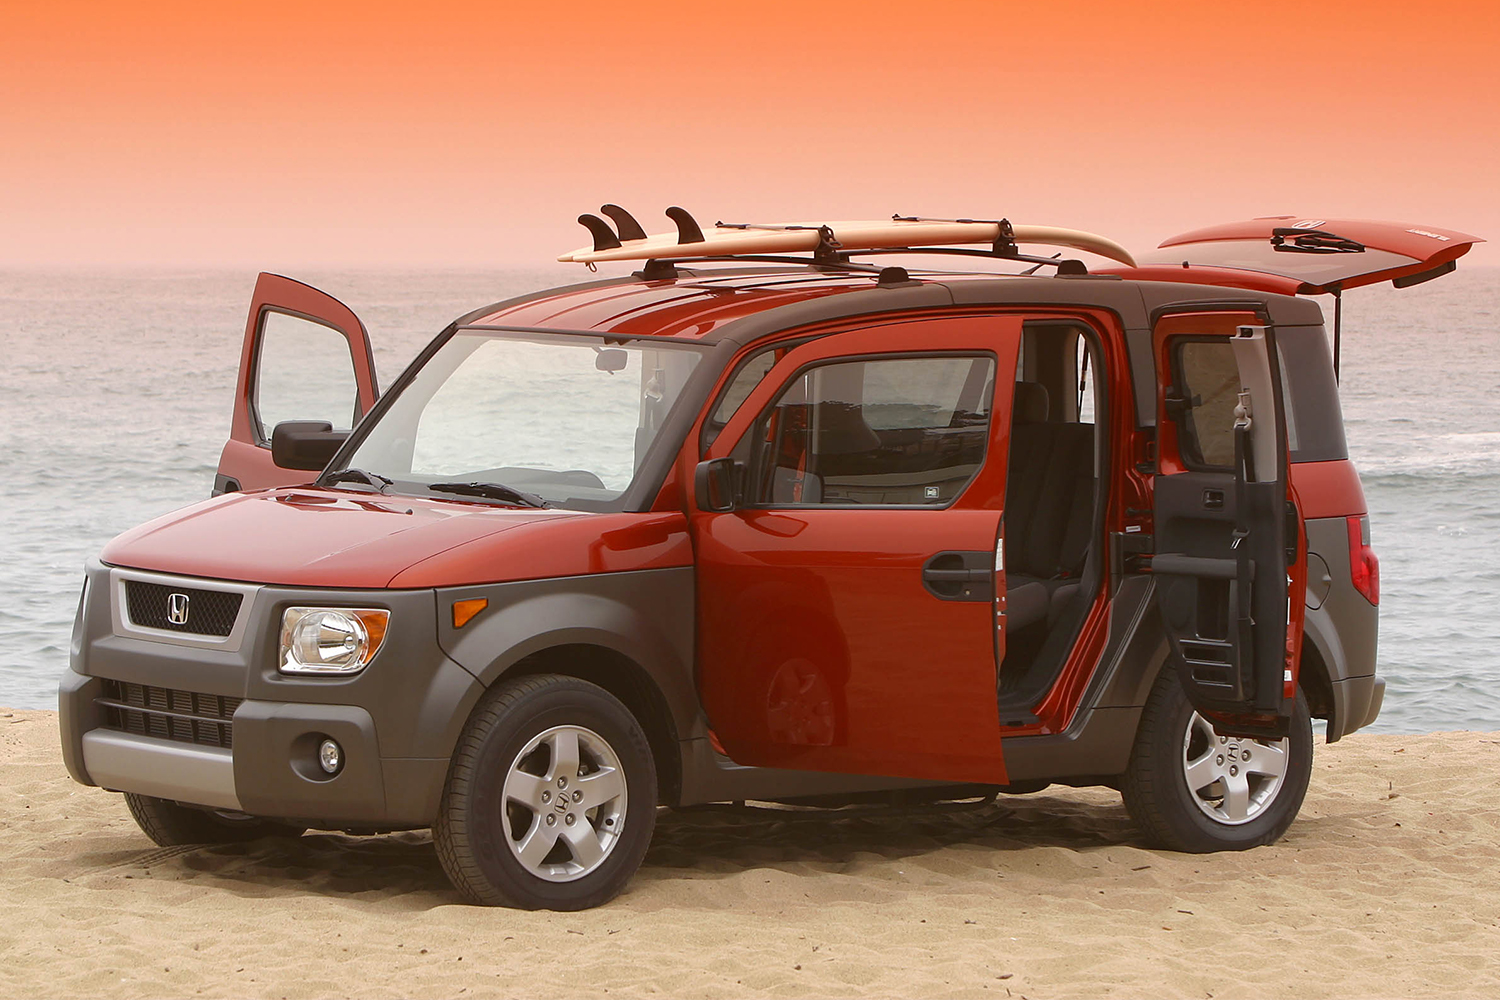 An orange and brown Honda Element with all the doors open and a surfboard on top sitting on the beach at sunset